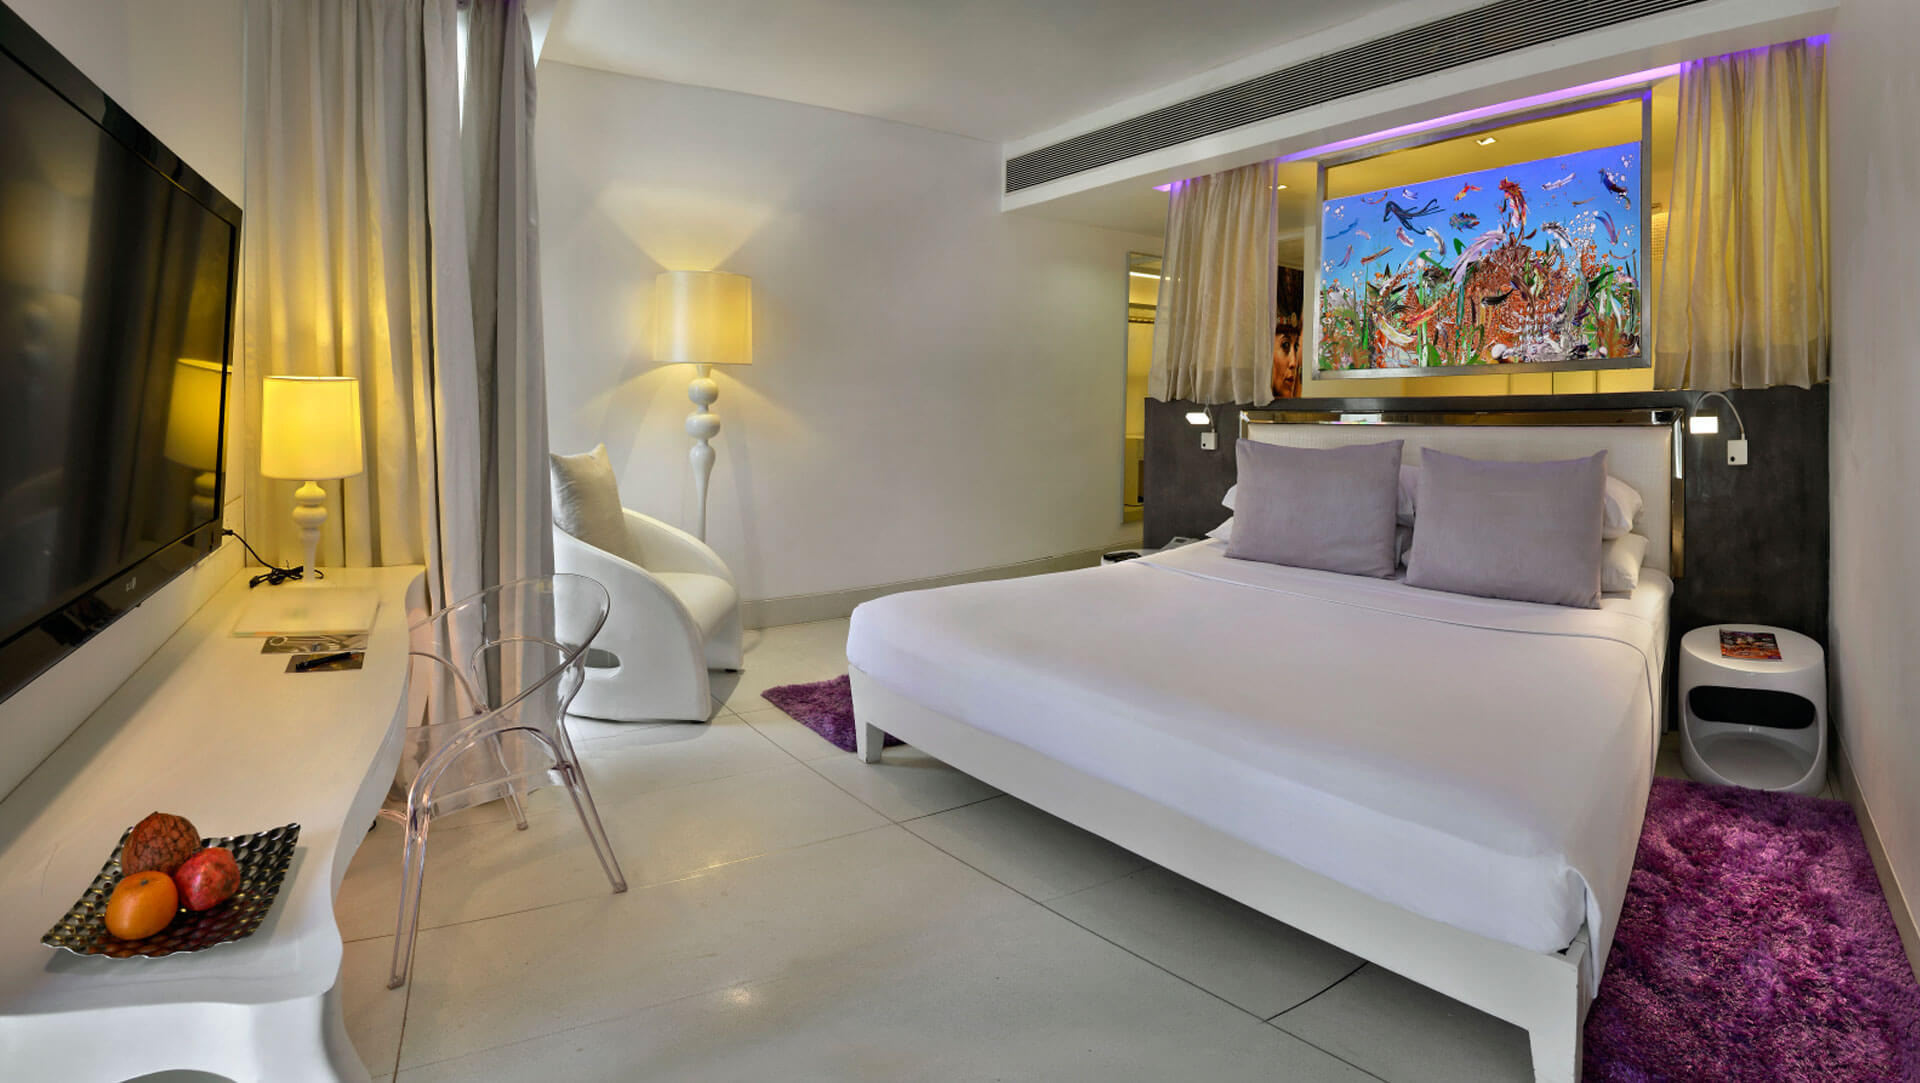 Luxury Rooms at The Park Hotels Calangute